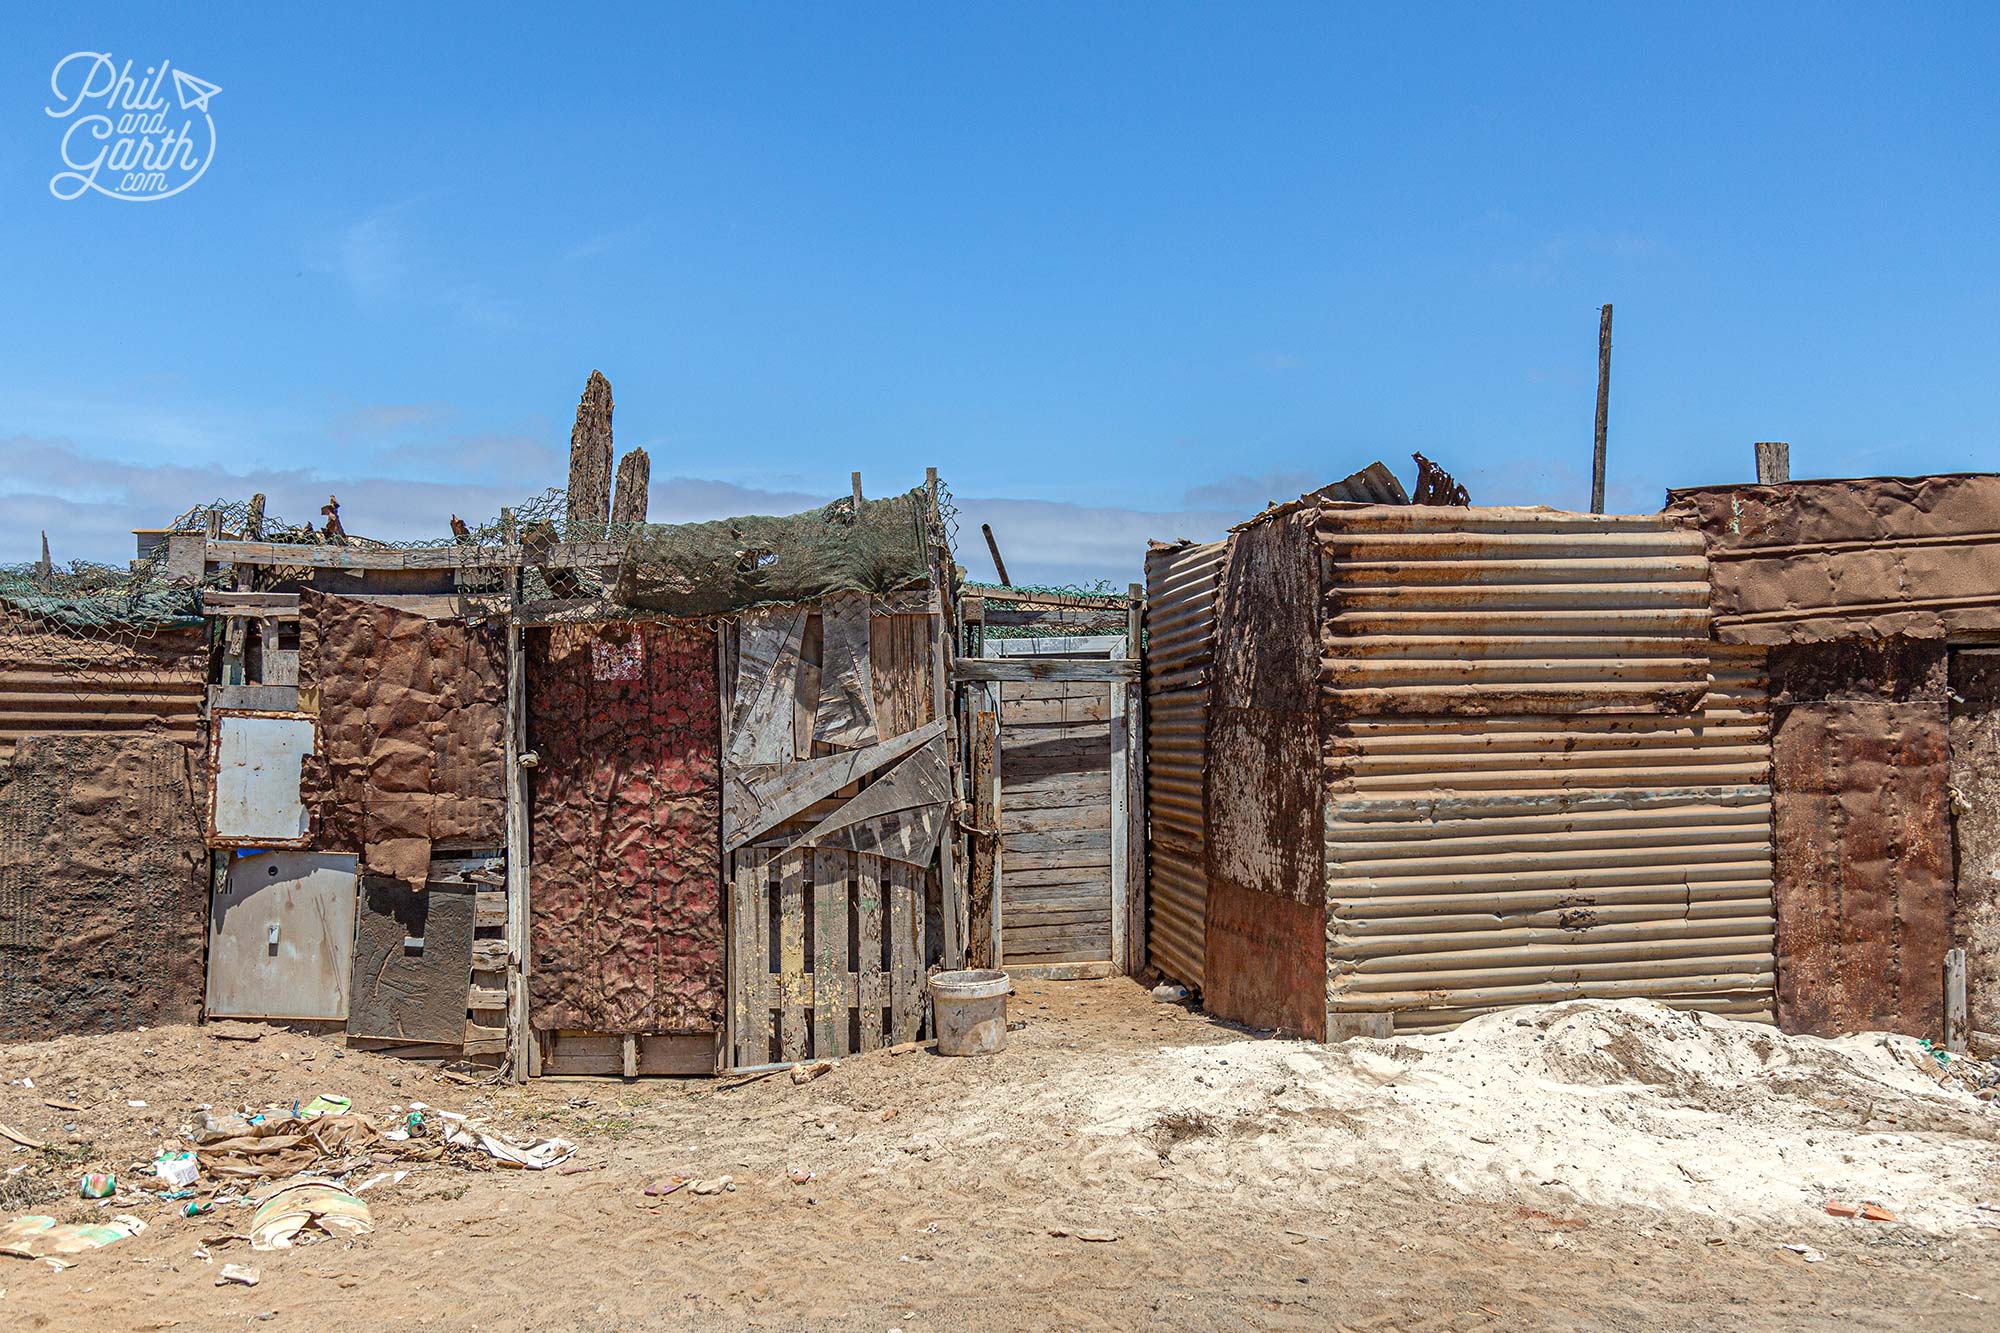 You will drive through a shanty town on the way to Terra Boa